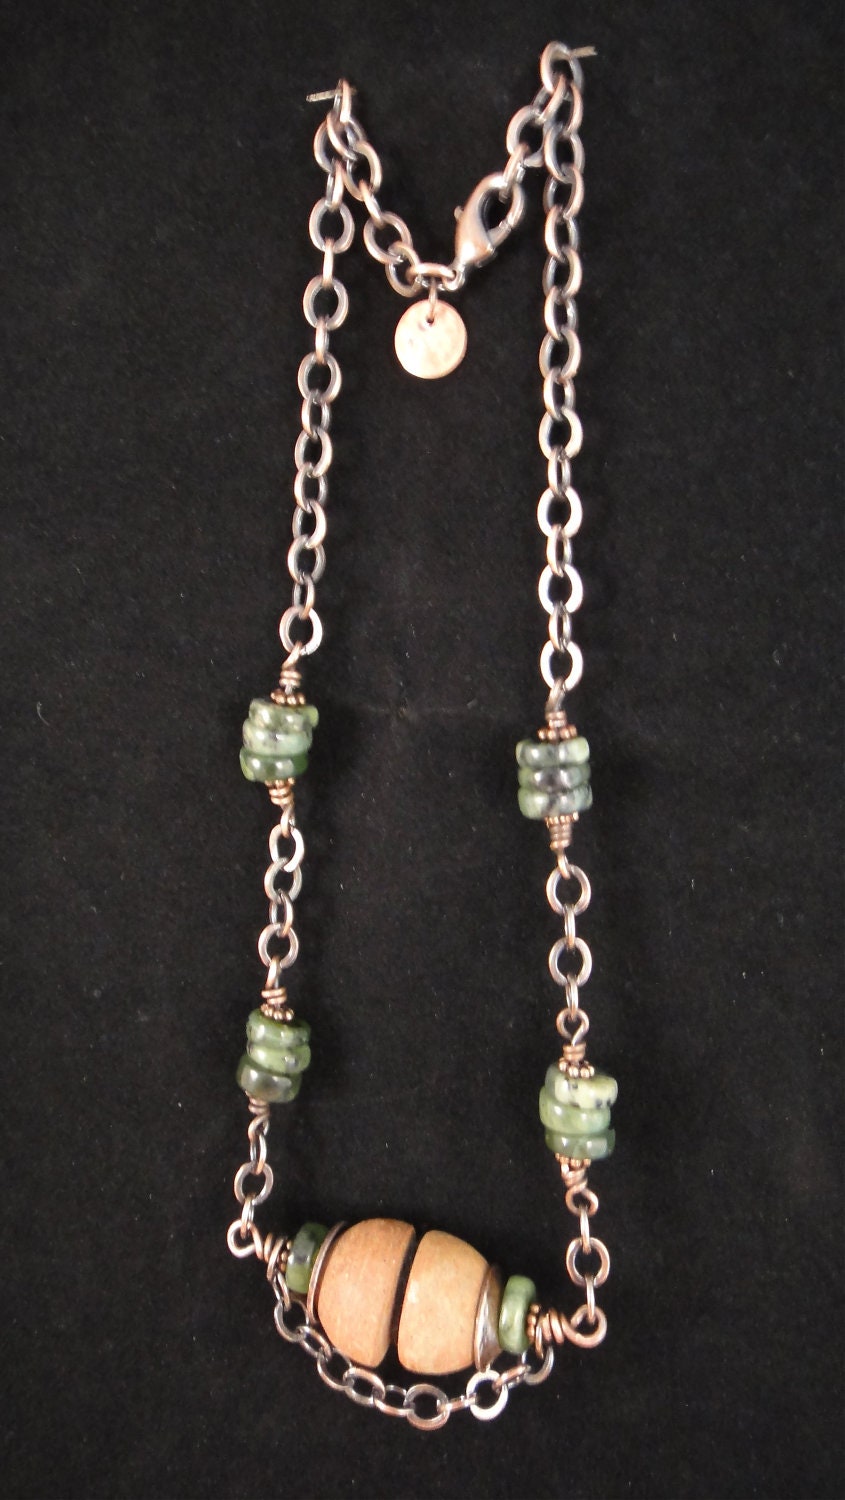 Green Agate Oxidized Copper Necklace With Pre-columbian | Etsy